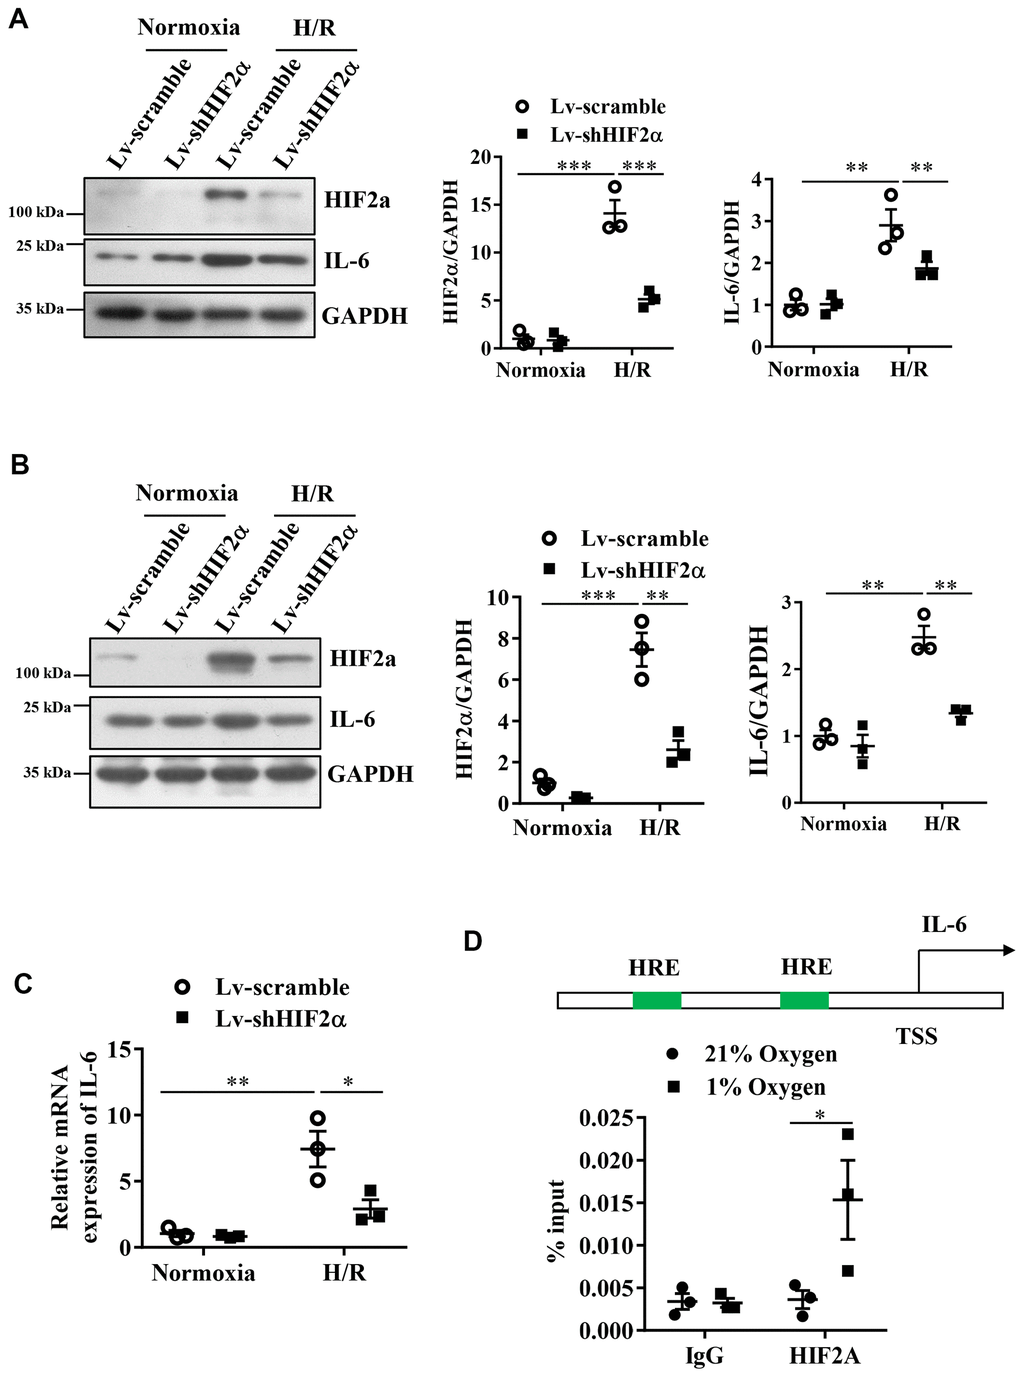 Expression of IL-6 during the H/R process in cardiomyocytes after knocking down endogenous HIF2α. (A) H9c2 myocardial cell line: Western blot to detect the expression level of IL-6 after knocking down endogenous HIF2α. (B) AC16 human cardiomyocyte line: Western blot to detect the expression level of IL-6 after knocking down endogenous HIF2α. (C) H9c2 cardiomyocyte cell line: qPCR to detect the expression level of IL-6 mRNA after knocking down endogenous HIF2α. (D) The results of ChIP: Diagram of the IL-6 promoter. Quantitative PCR analysis of anti- HIF2α antibody-precipitated and control IgG antibody-precipitated chromatin from cardiomyocytes cultured in 21 or 1% O2. HRE: hypoxia response element. n = 3 per group. Data represent the mean ± SEM. *PPP